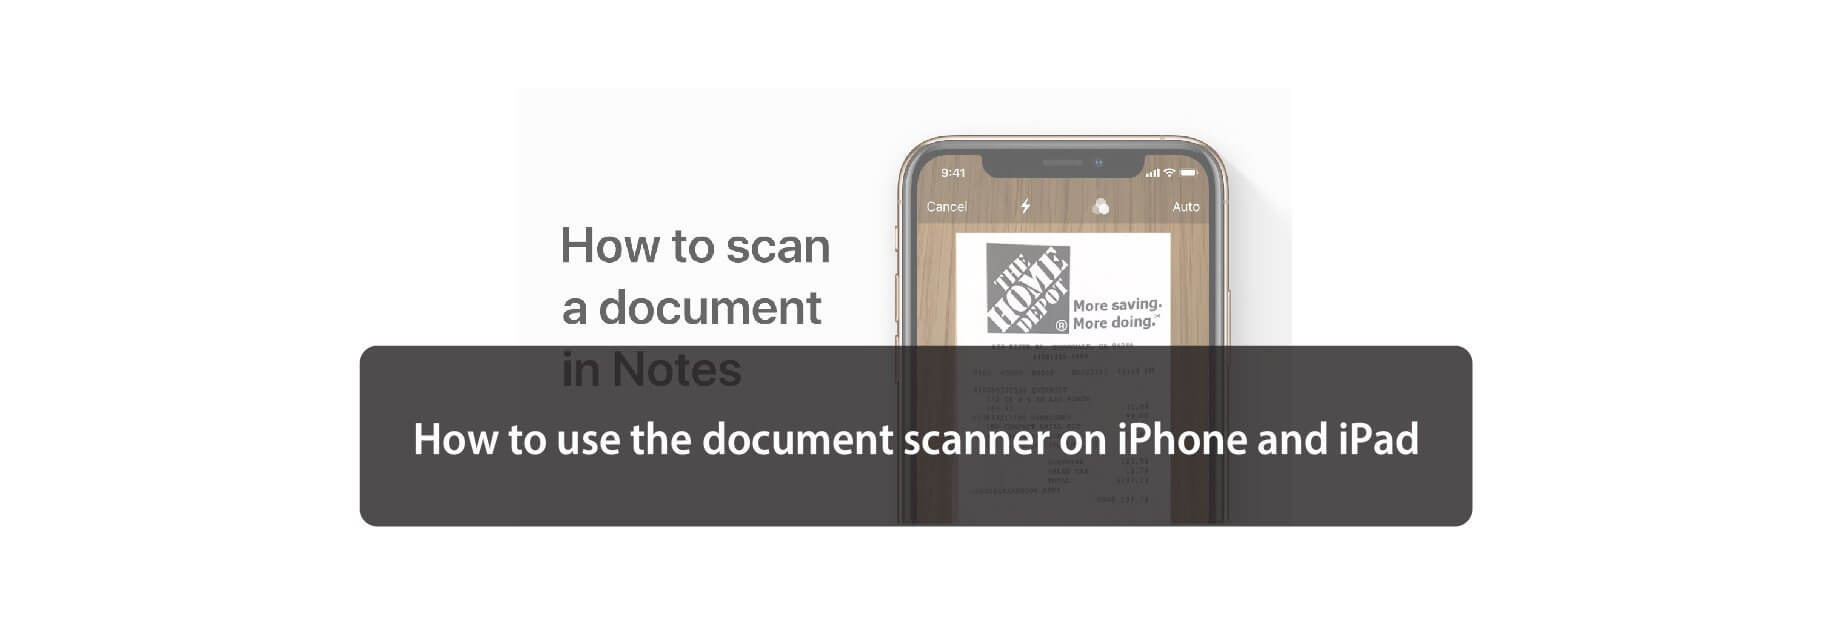 How to use the document scanner on iPhone and iPad